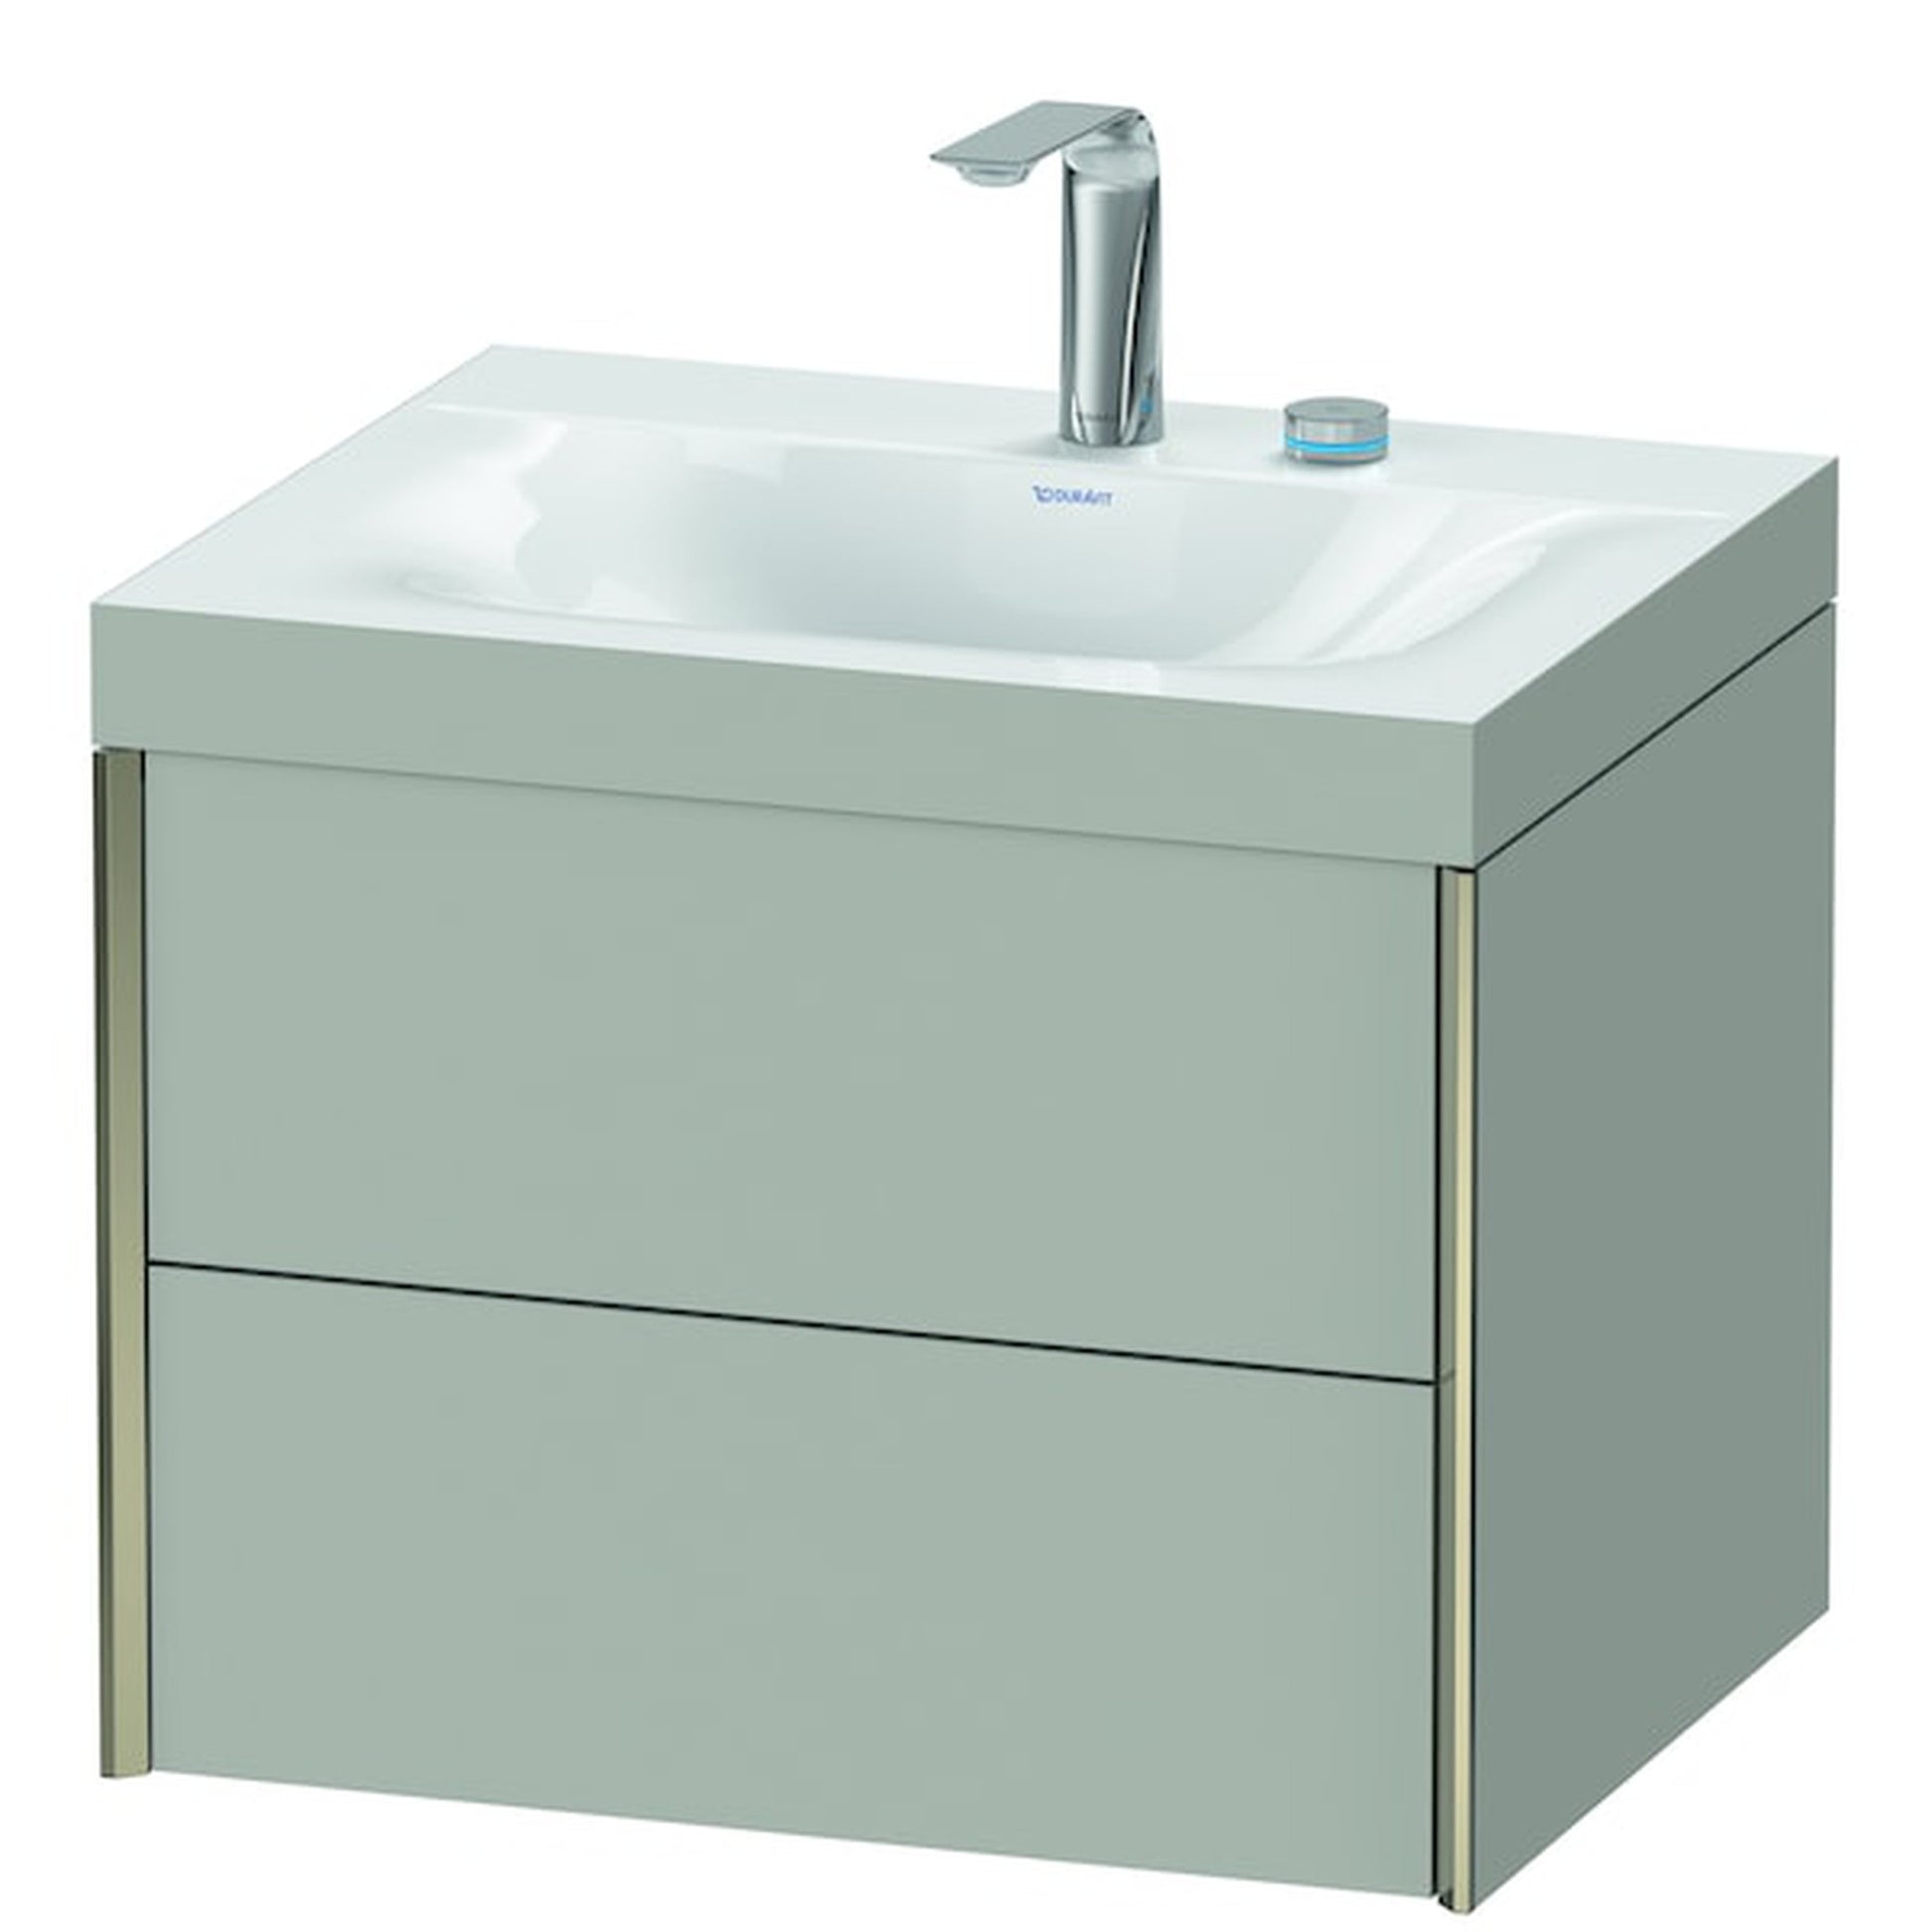 Duravit Xviu 24" x 20" x 19" Two Drawer C-Bonded Wall-Mount Vanity Kit With Two Tap Holes, Concrete Gray (XV4614EB107C)